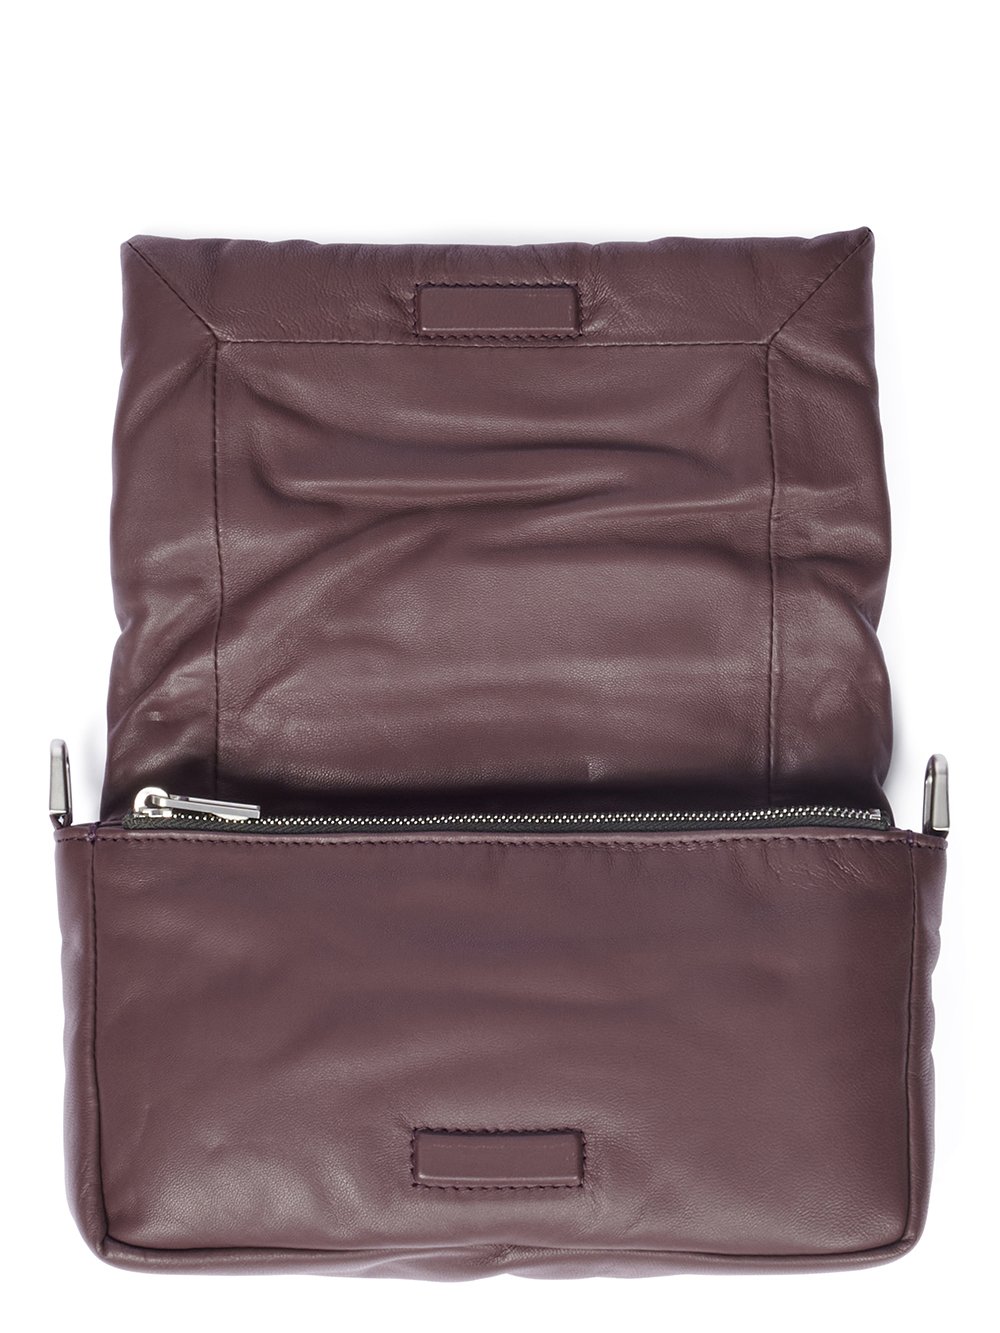 RICK OWENS FW23 LUXOR PILLOW GRIFFIN IN AMETHYST PEACHED LAMBSKIN